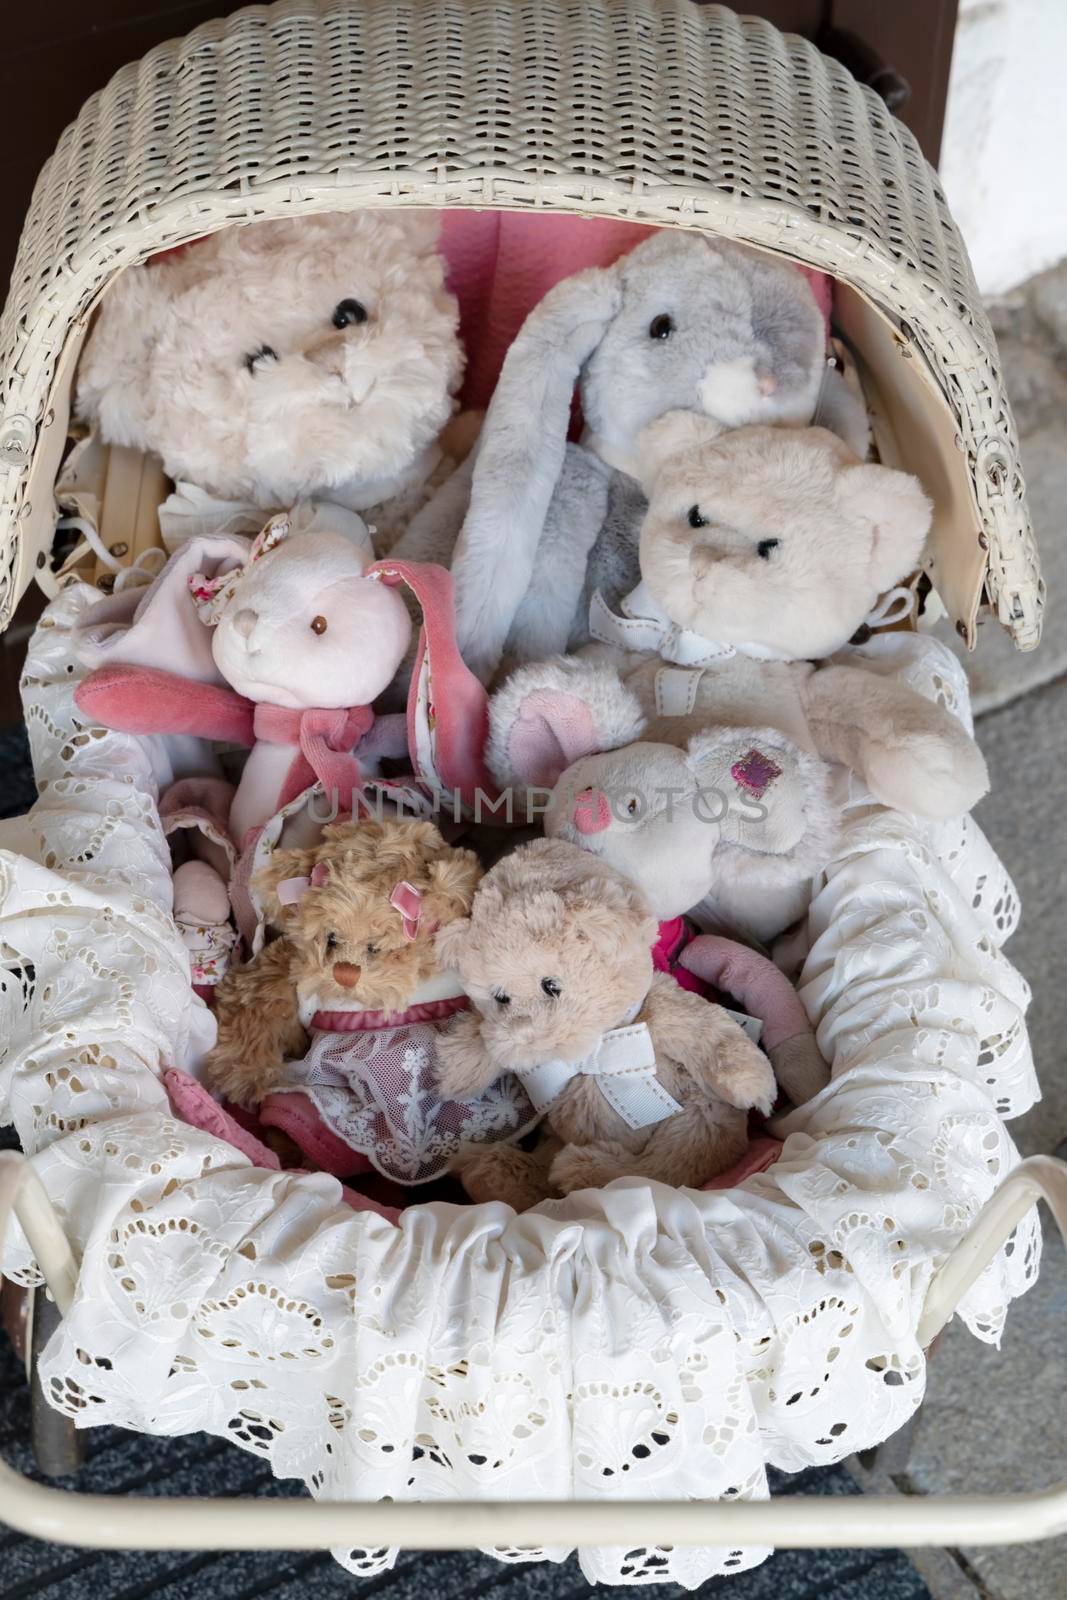 stuffed toys in the old fashioned buggy